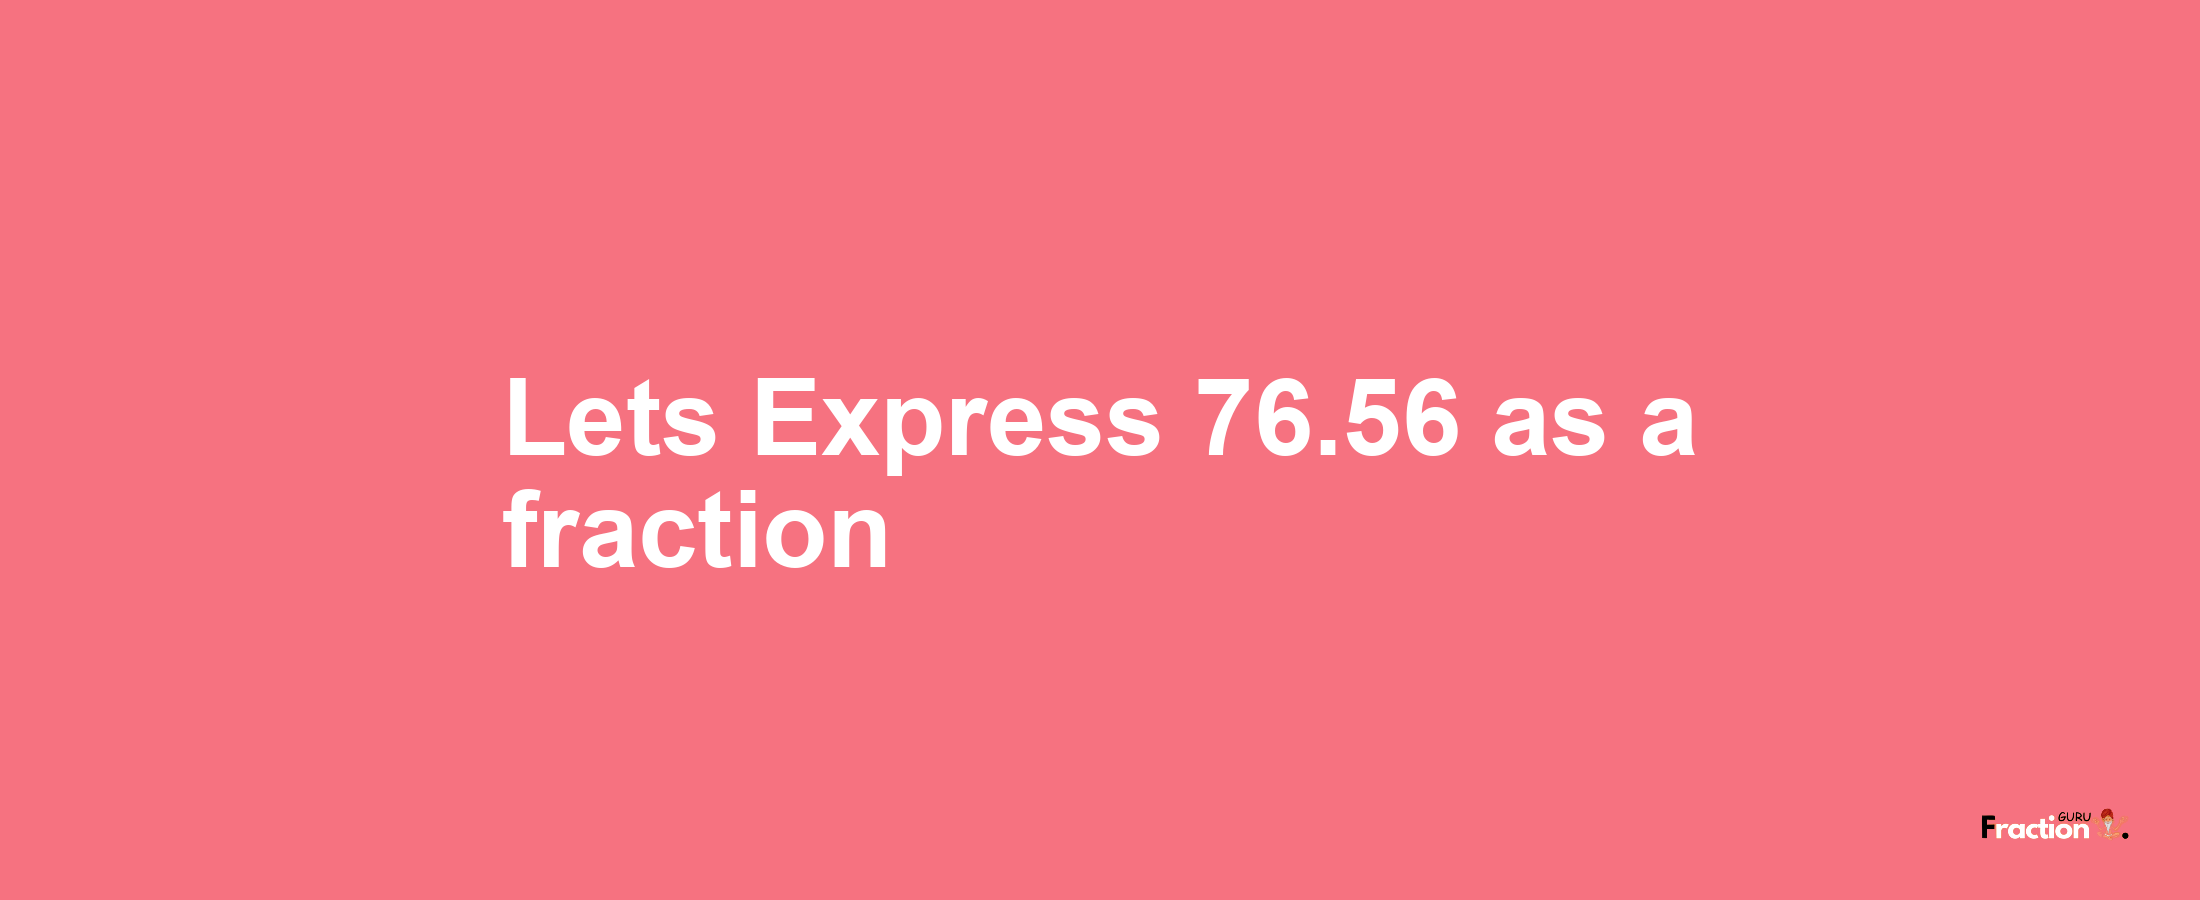 Lets Express 76.56 as afraction